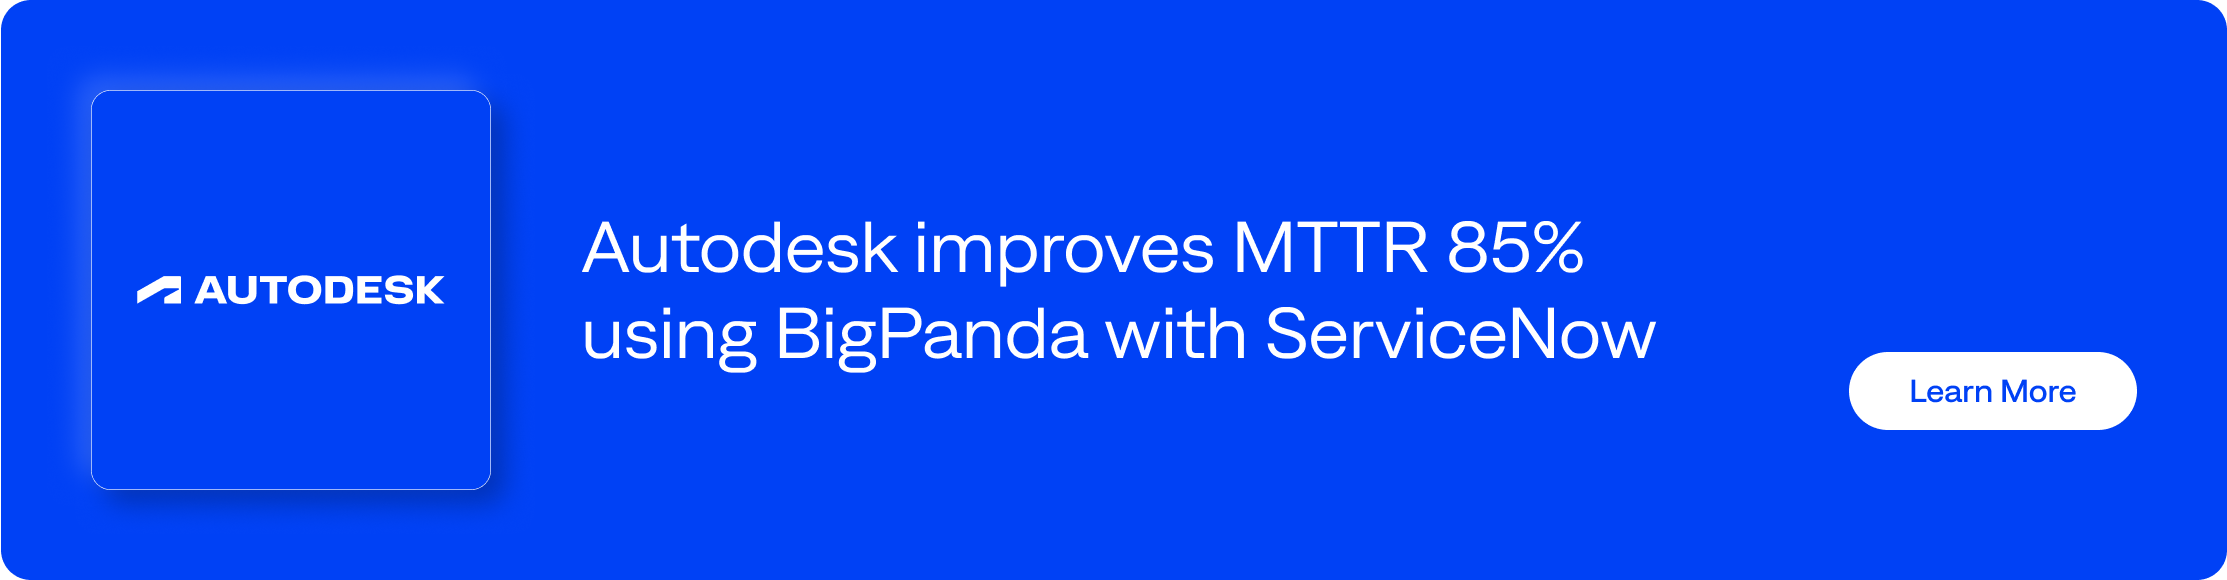 Autodesk improves MTTR 85% using BigPanda with ServiceNow - Learn more